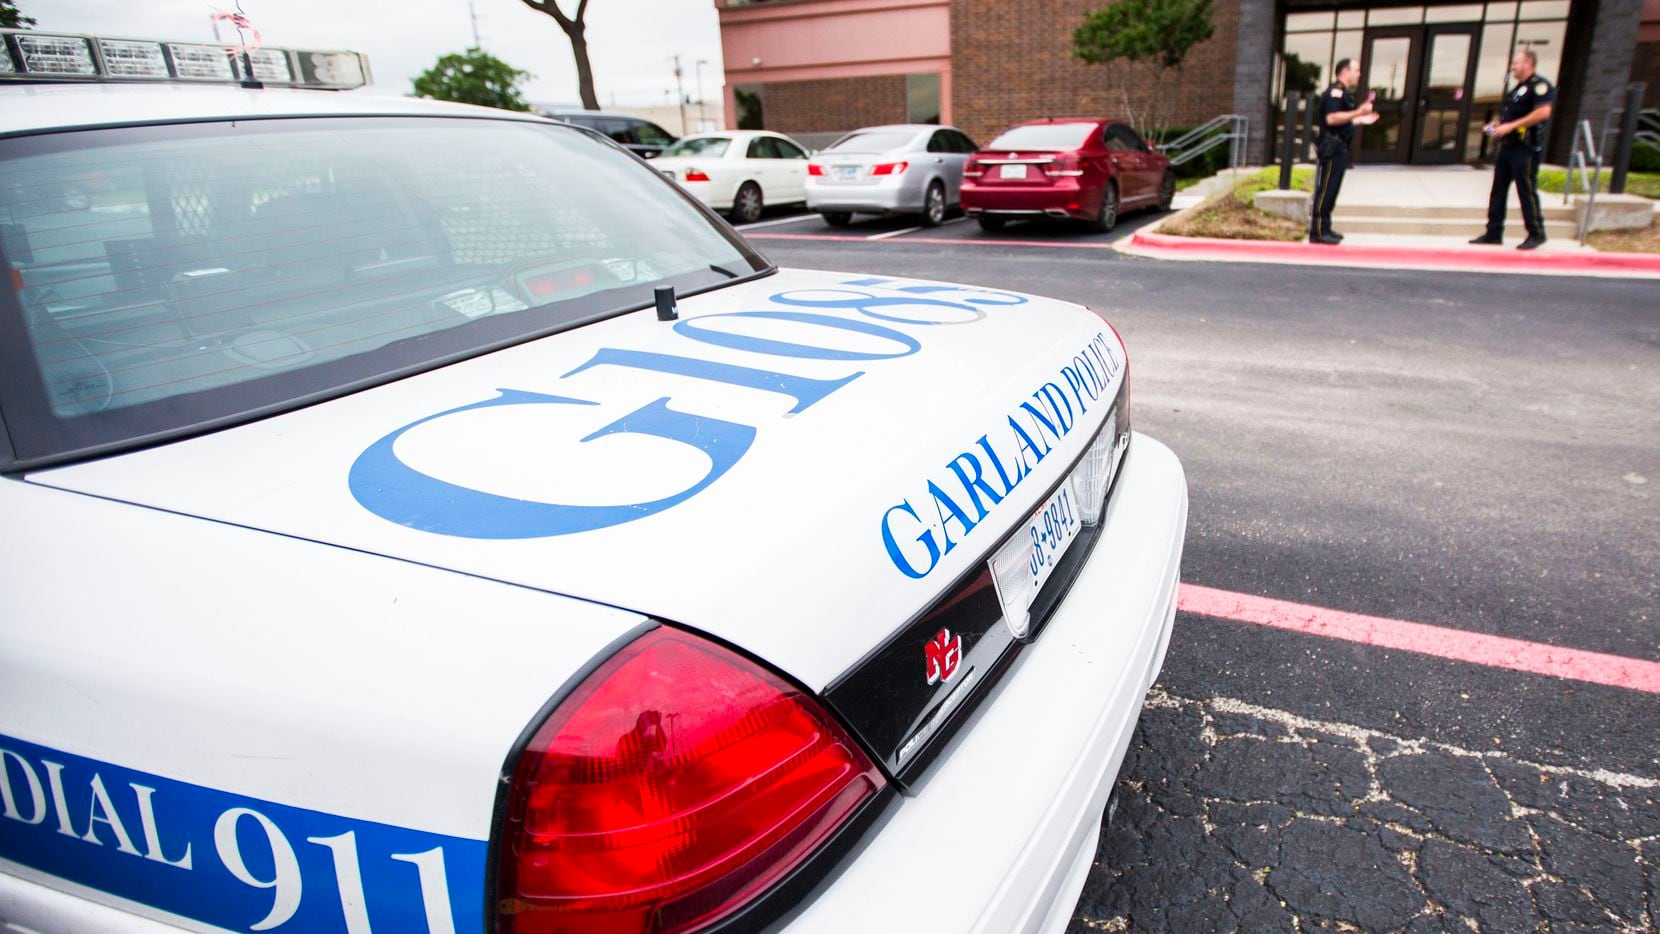 A Garland police car is parked outside a school board meeting in this 2015 file photo.